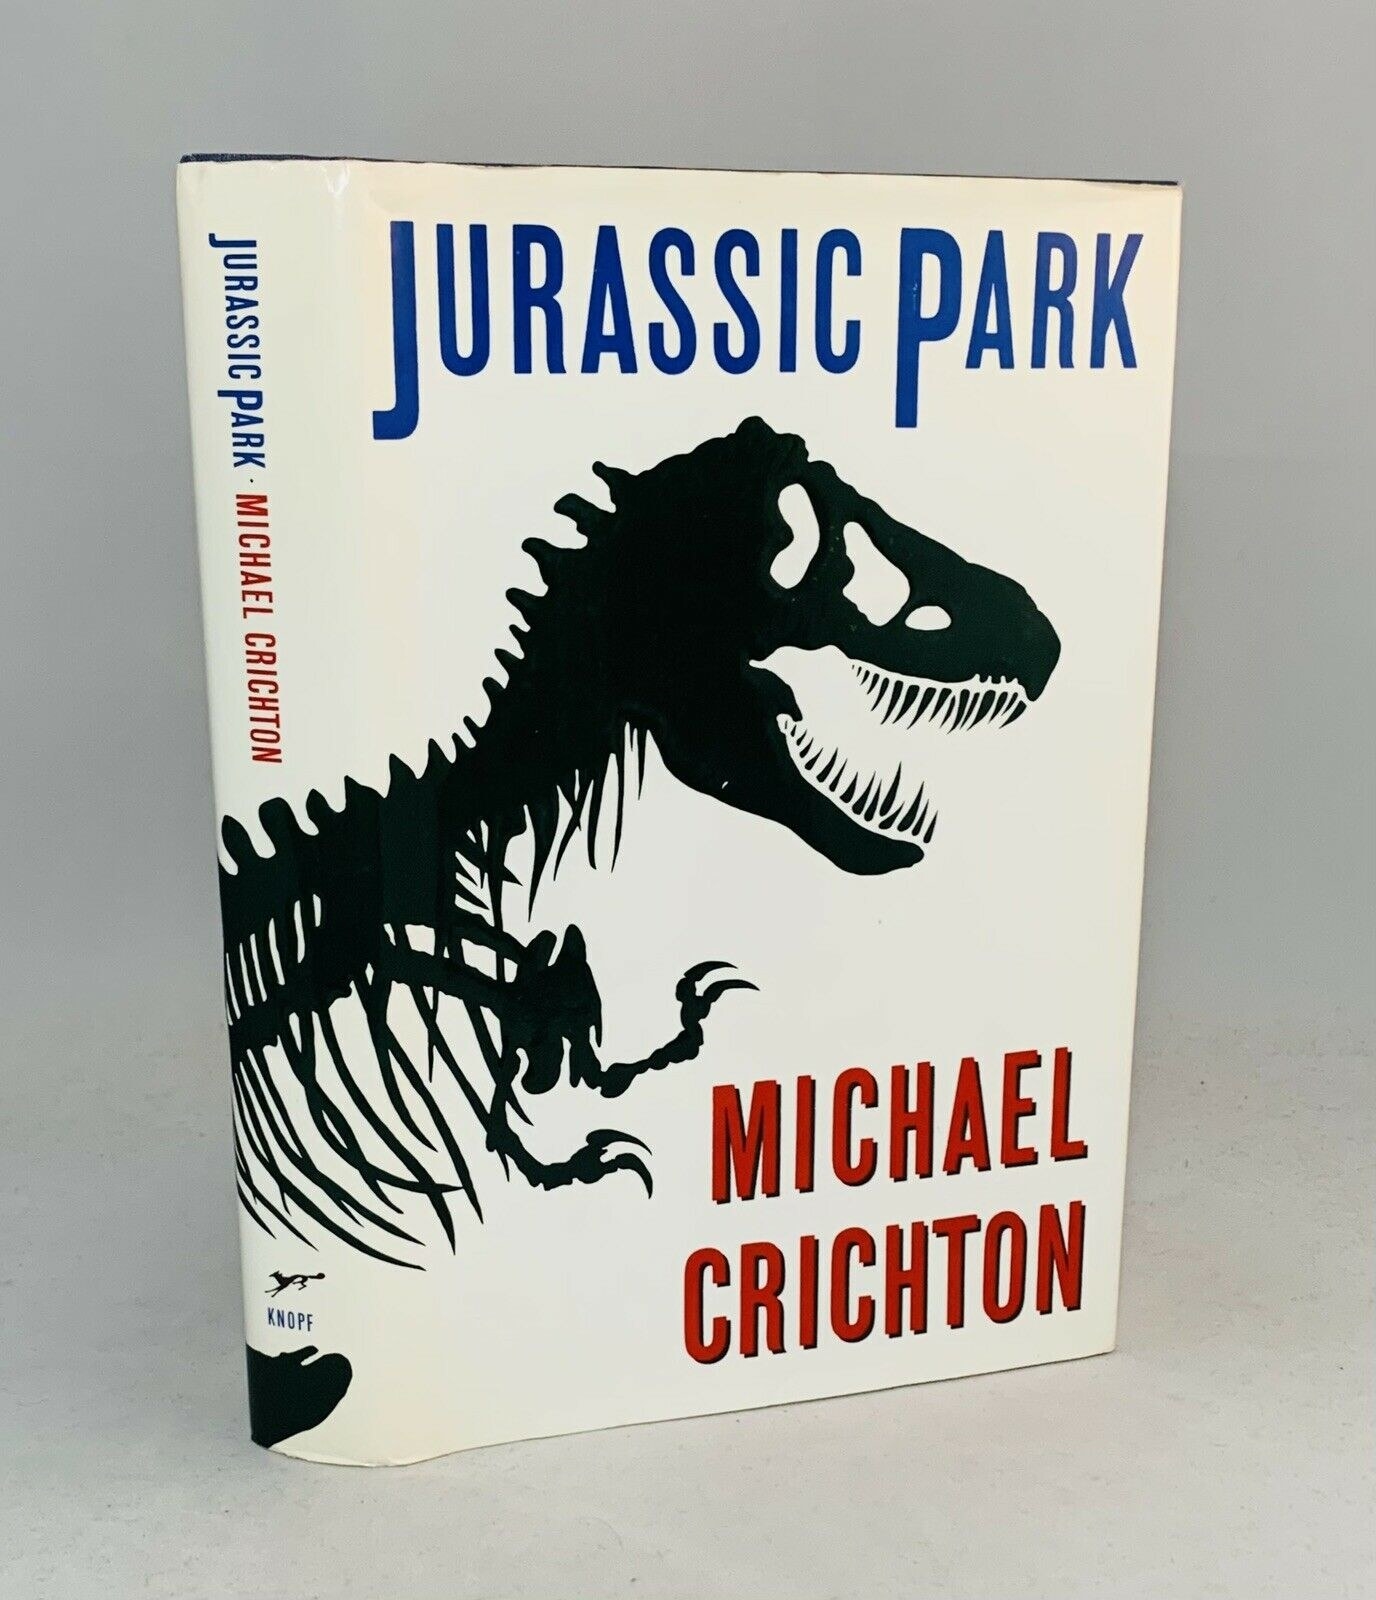 a first edition of Jurassic Park book featuring a skeleton of t-rex on the cover